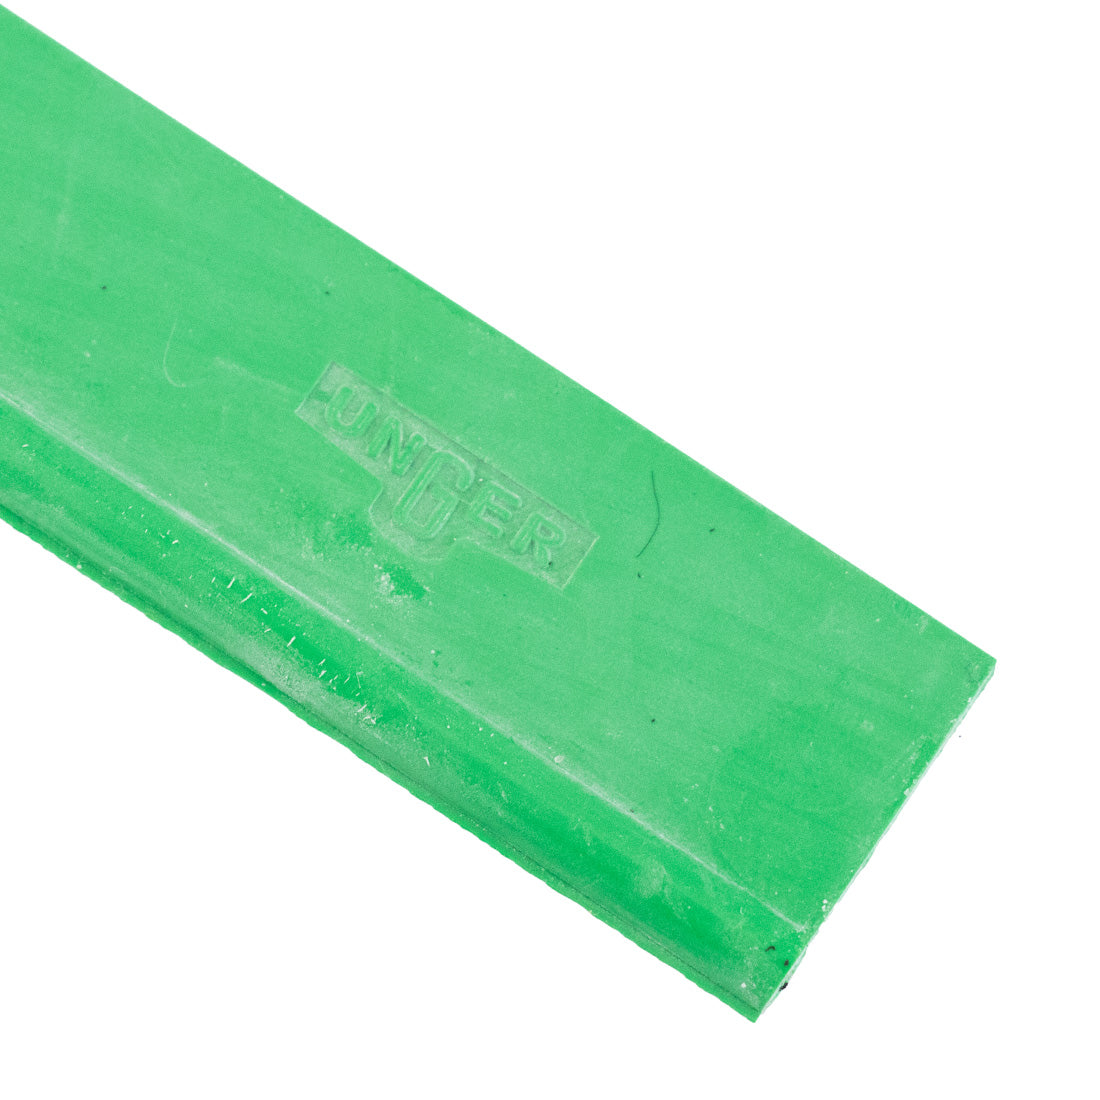 Unger - Unger 12 Rubber Window Squeegee Refill Only